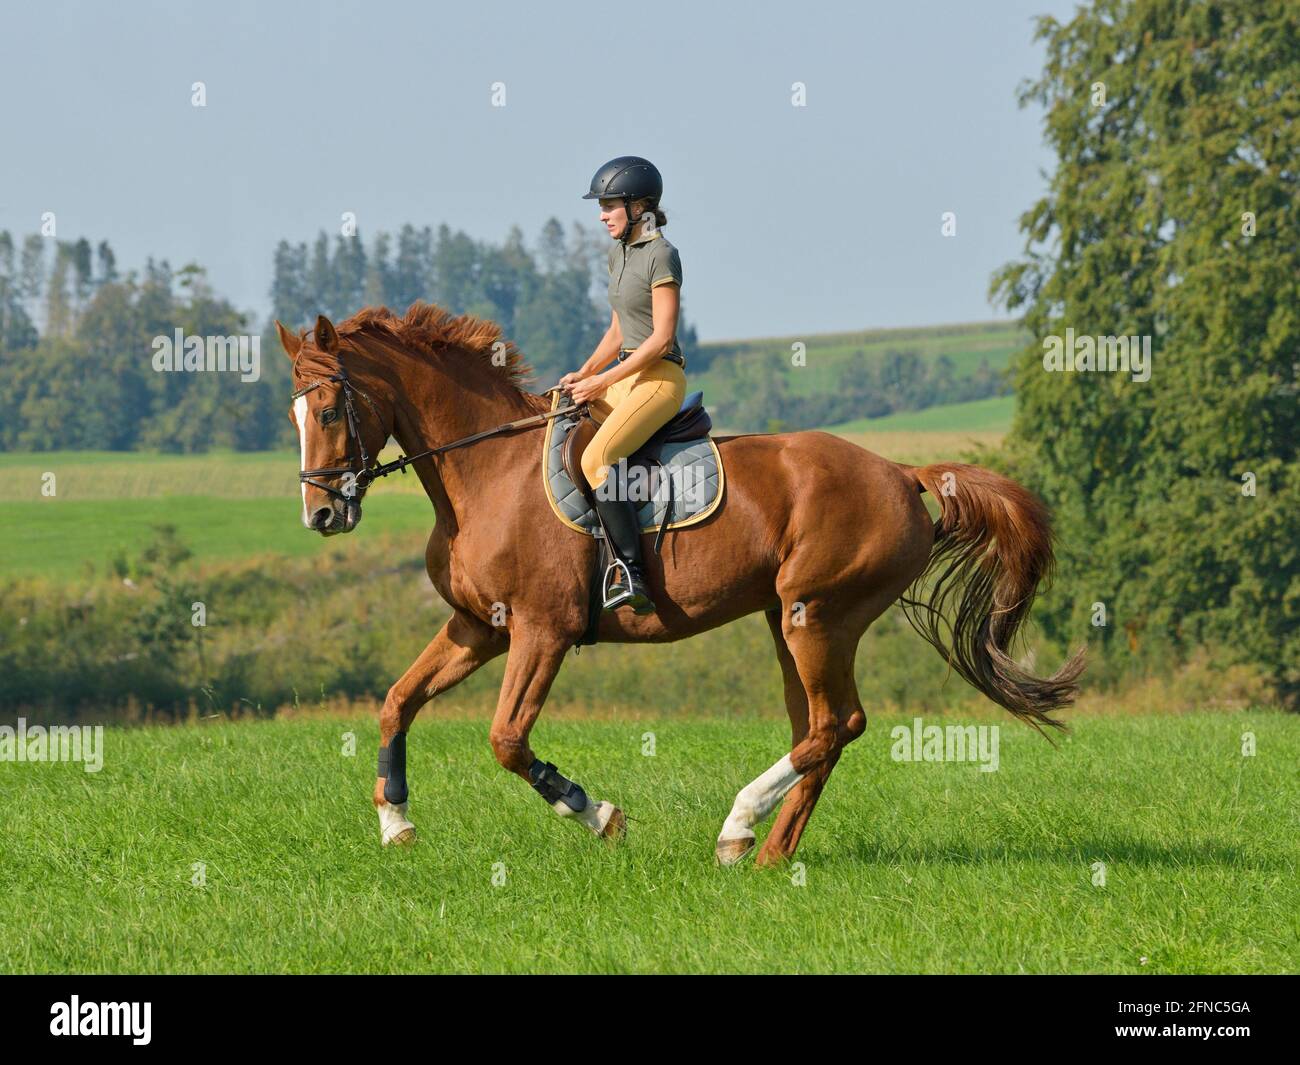 Rider on back of a Bavarian chestnut horse cantering in a meadow Stock Photo